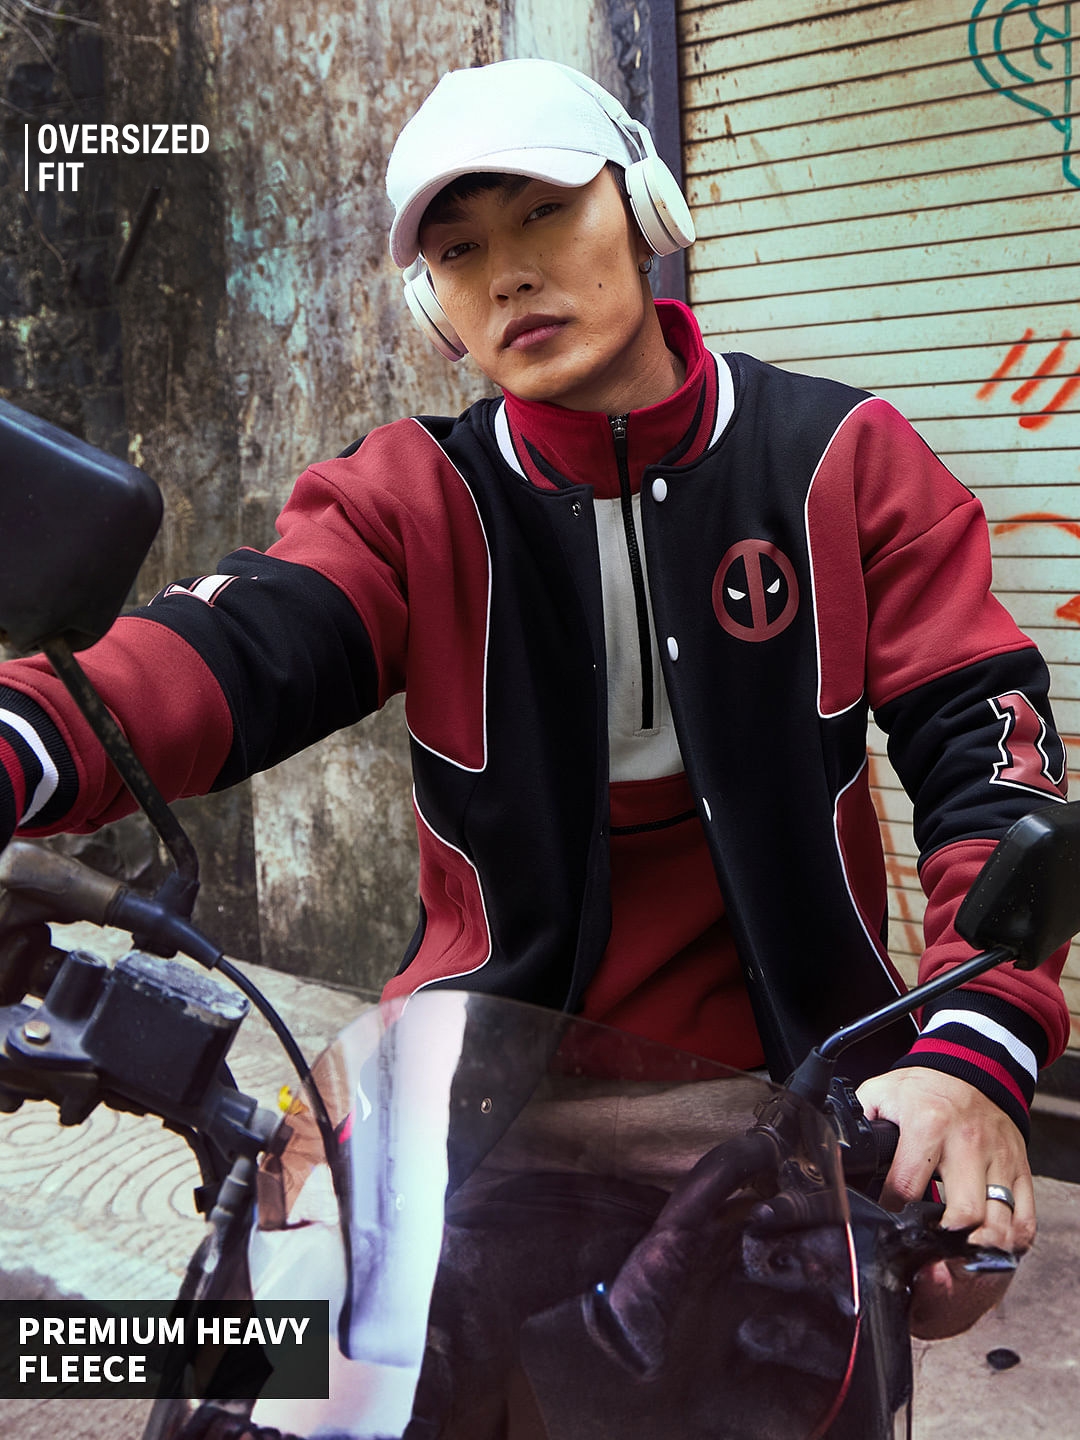 The Souled Store | Men's Deadpool: Merc With A Mouth Varsity Jackets